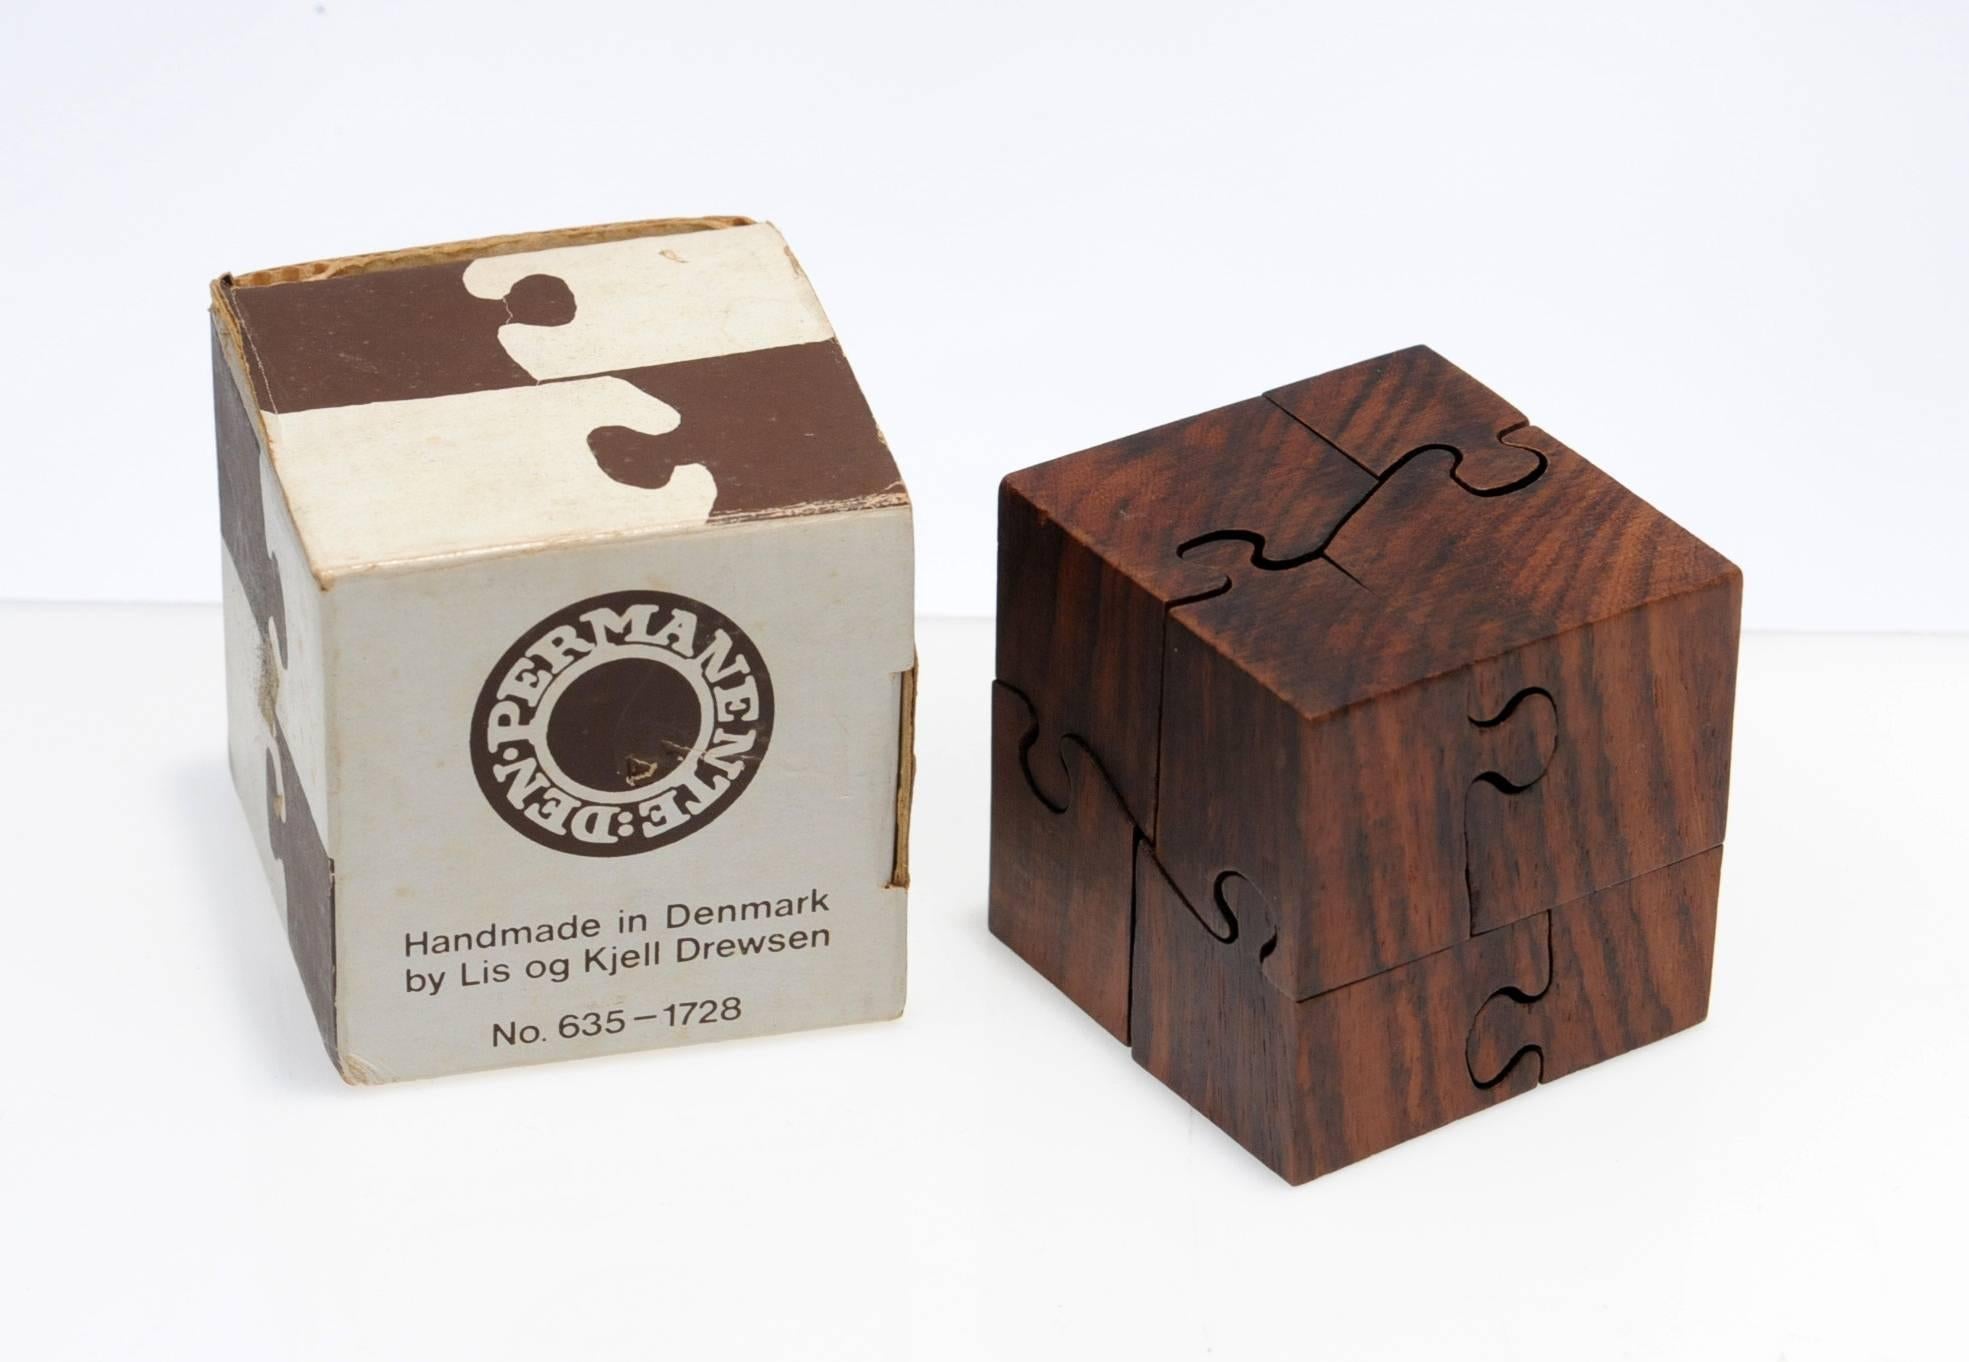 Hard to find, beautiful rosewood puzzle by Lis go Kjell Drewsen, Denmark. Puzzle is handmade and cleverly designed and truly a challenge. Comes complete with the original box. Condition is excellent.
    